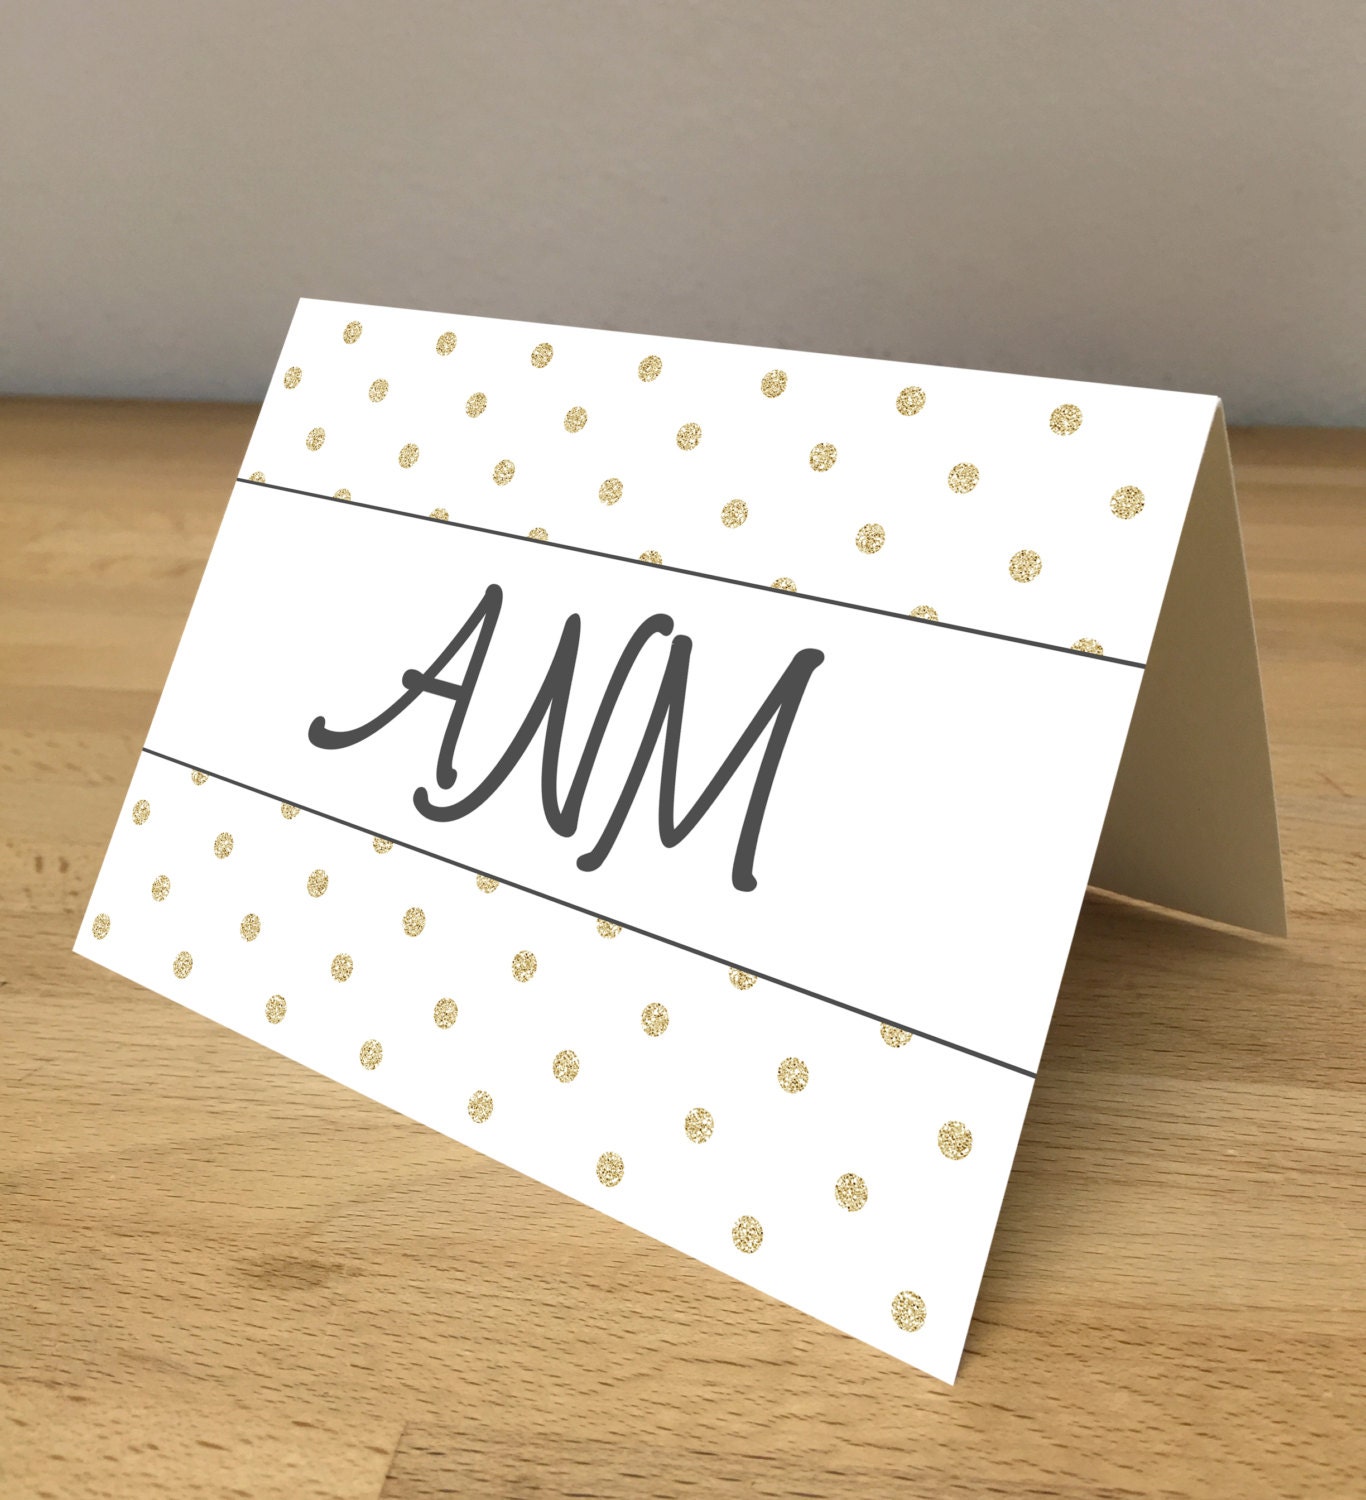 Personalized Note Cards - Gold Polka Dot